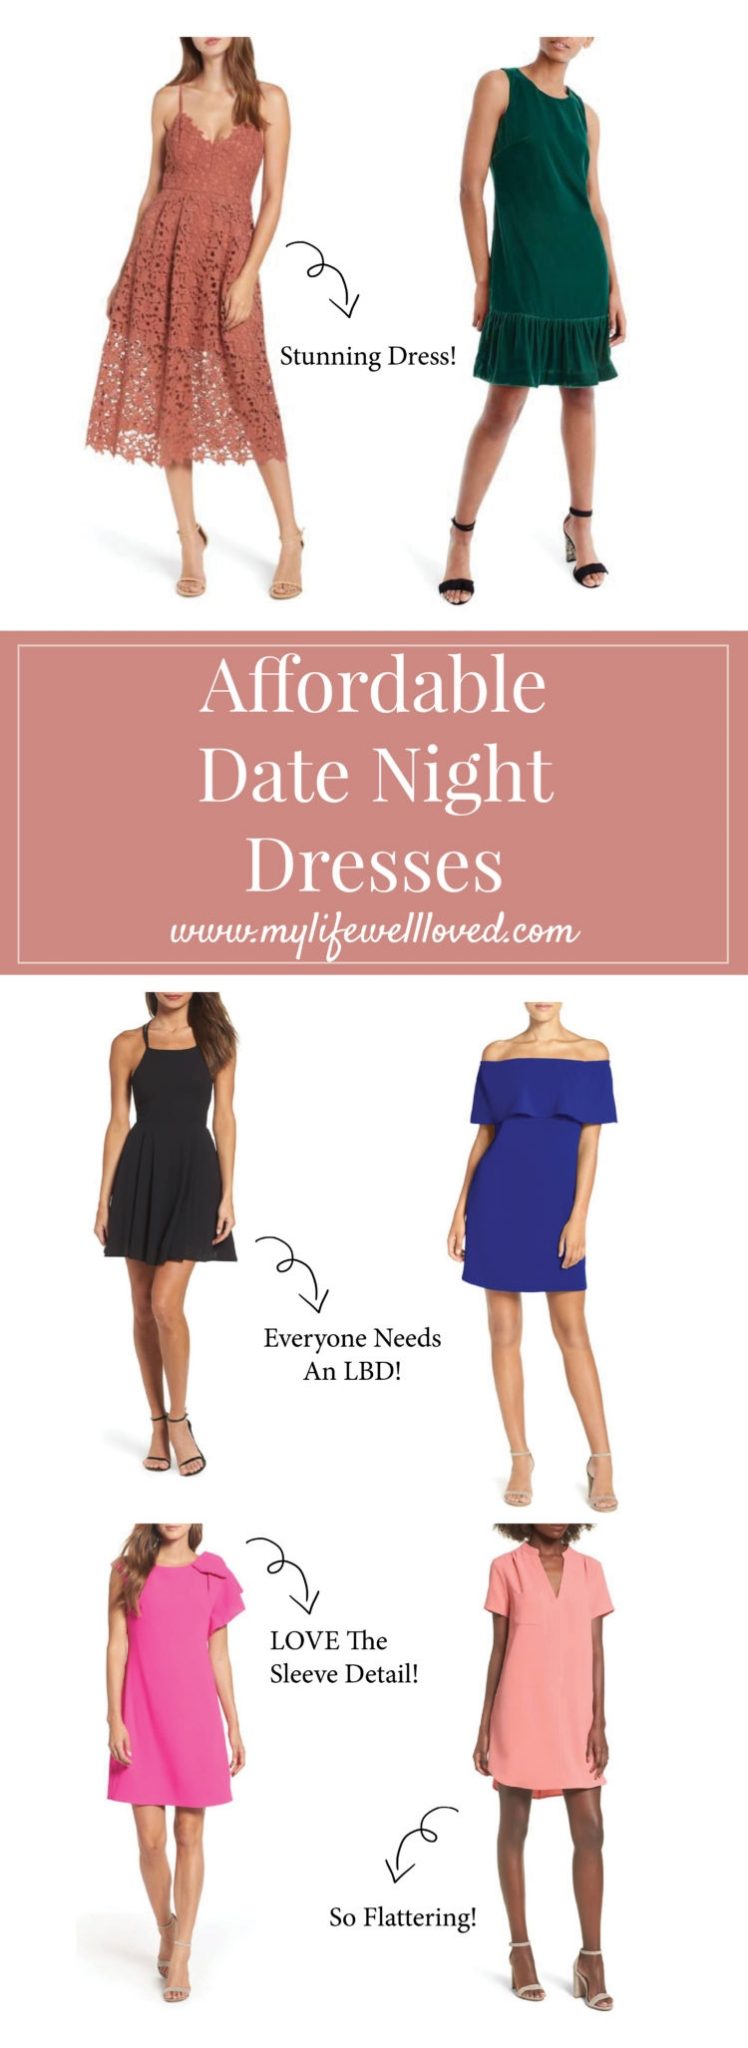 Winter Date Night Dress | Shop Date Night Dresses Online - Hello Molly US |  Hello Molly